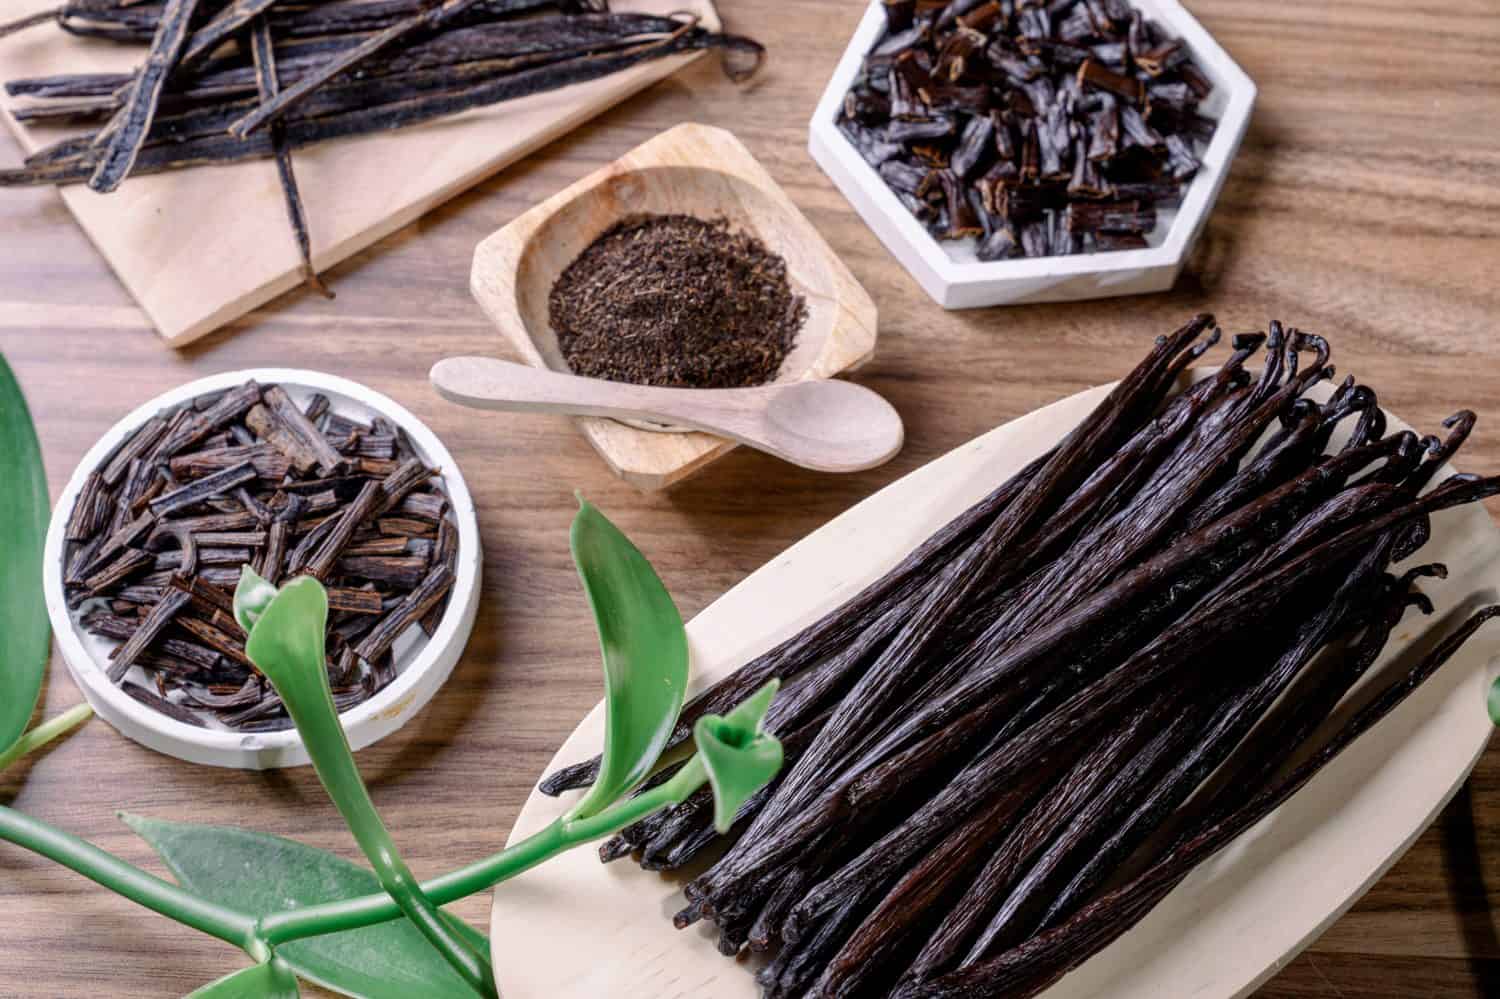 Vanilla beans, a source of delicacy in food and drink